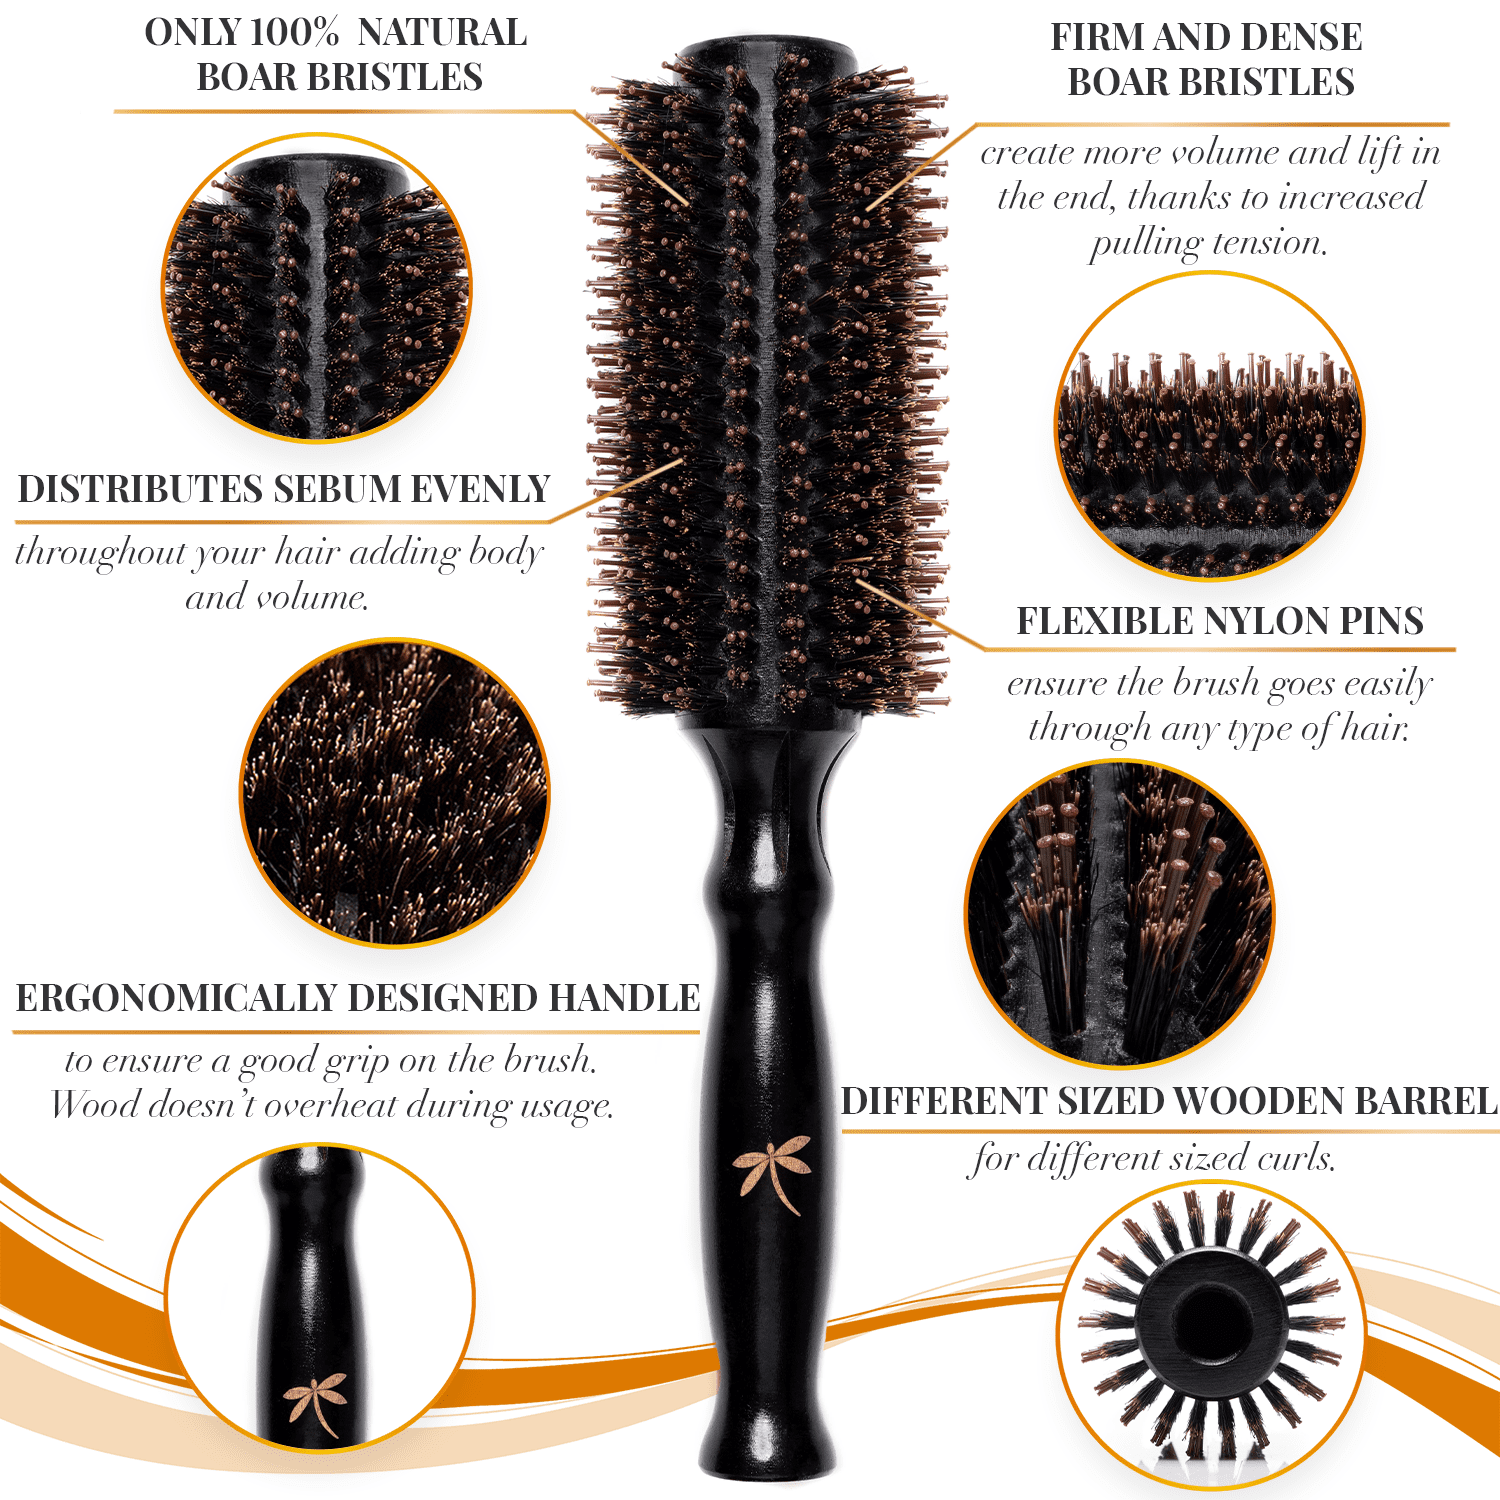 Belula Care Premium Boar Bristle Hair Brush for Thick Hair Set. Hairbrush for Women with Thick, Long or Curly Hair., Orange